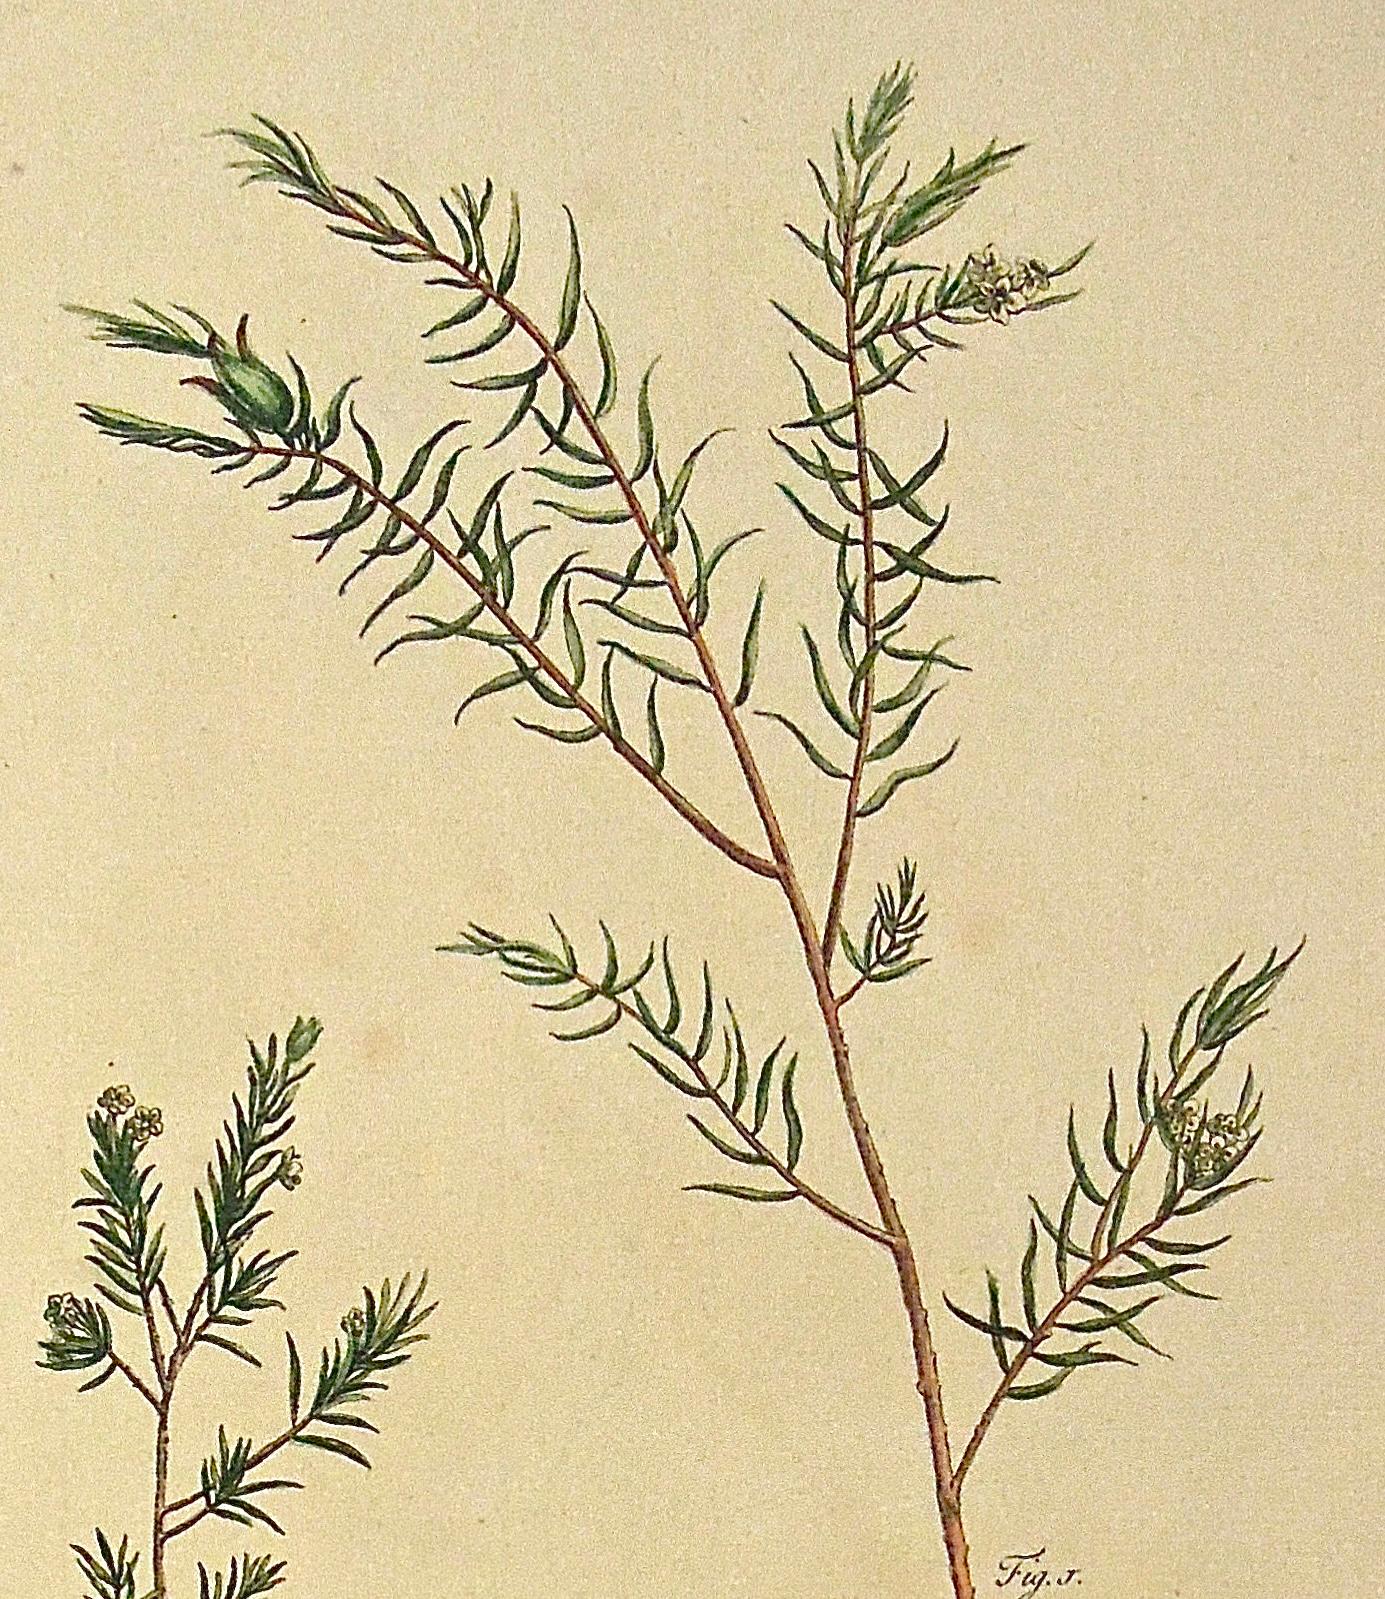 Diosma.
Upper Right: Pl. CXXIV. Lower Left: R. Lancake delin. Lower Center: Publish'd according to Act of Parliament by P. Miller Octr. 24:1756. Lower Right: I. S. Miller Sculp.
Author: Philip Miller
Source / Publication: The Gardener's